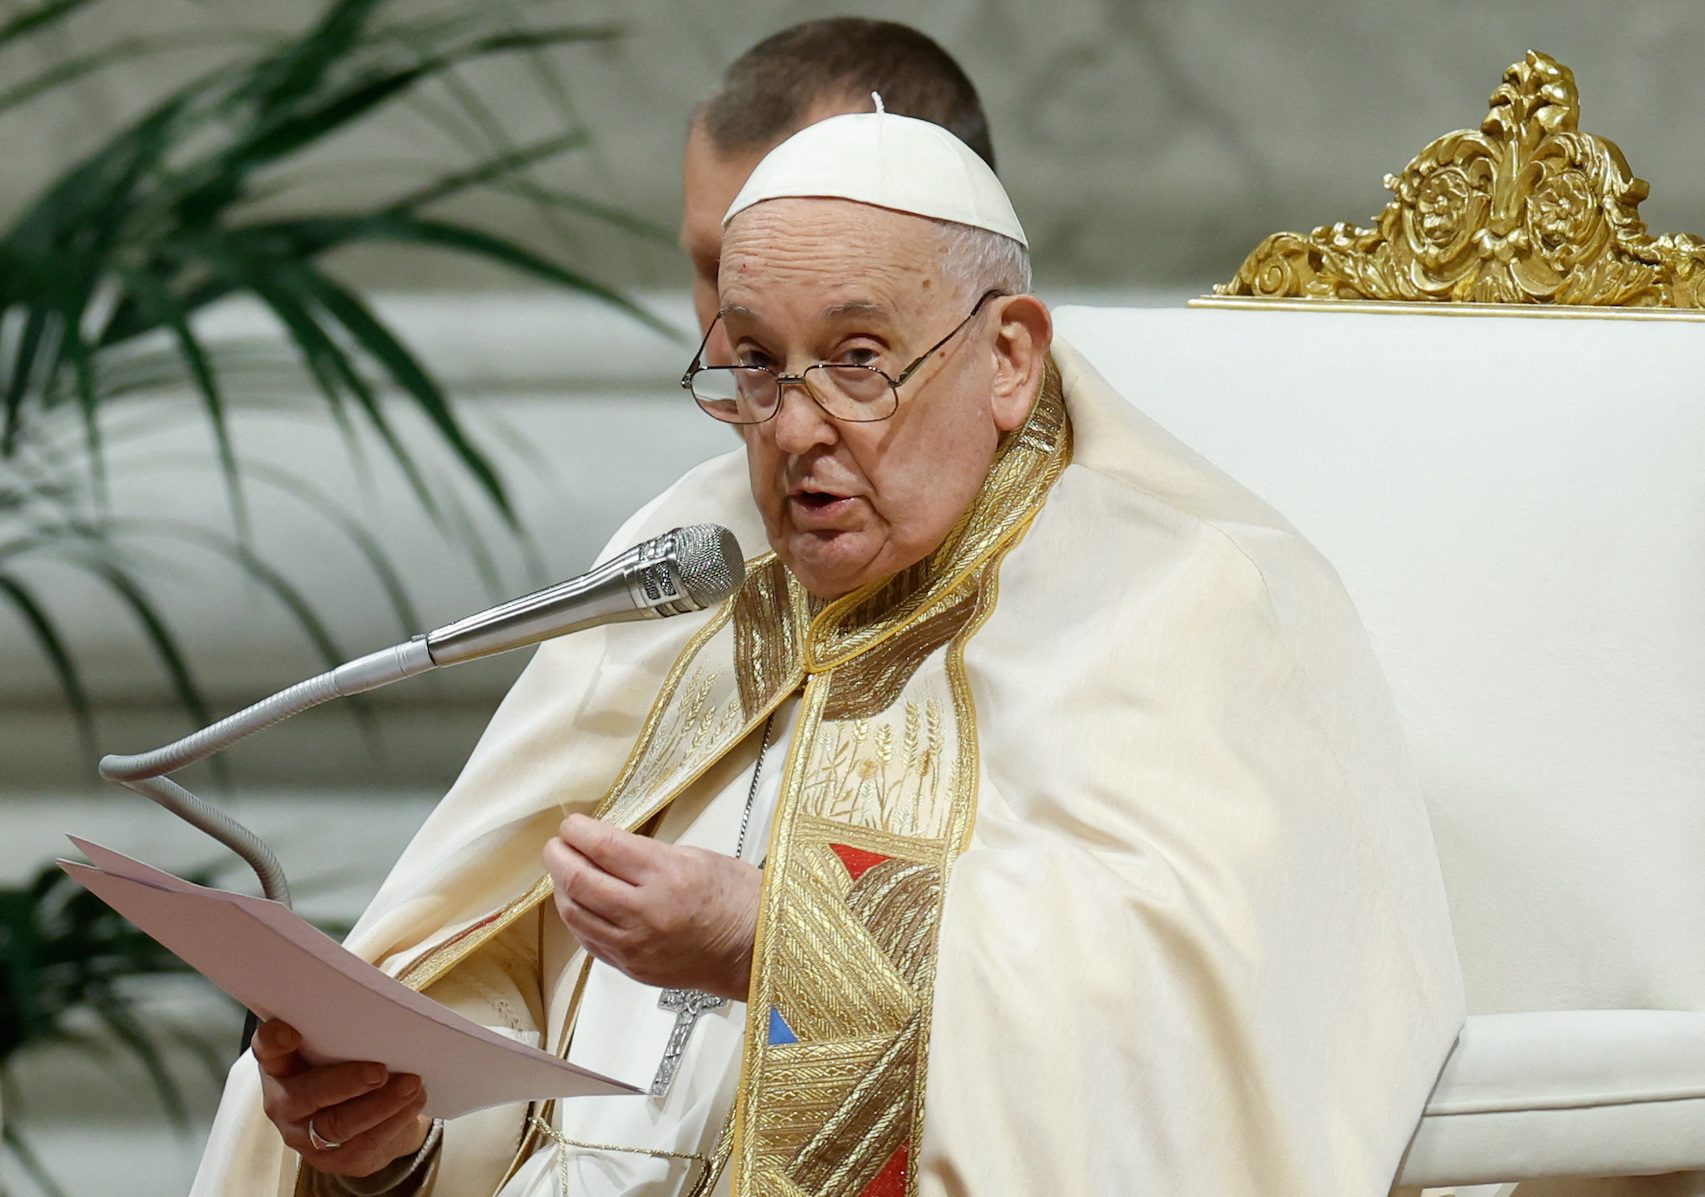 Pope Francis urged to offer financial support for abused nuns